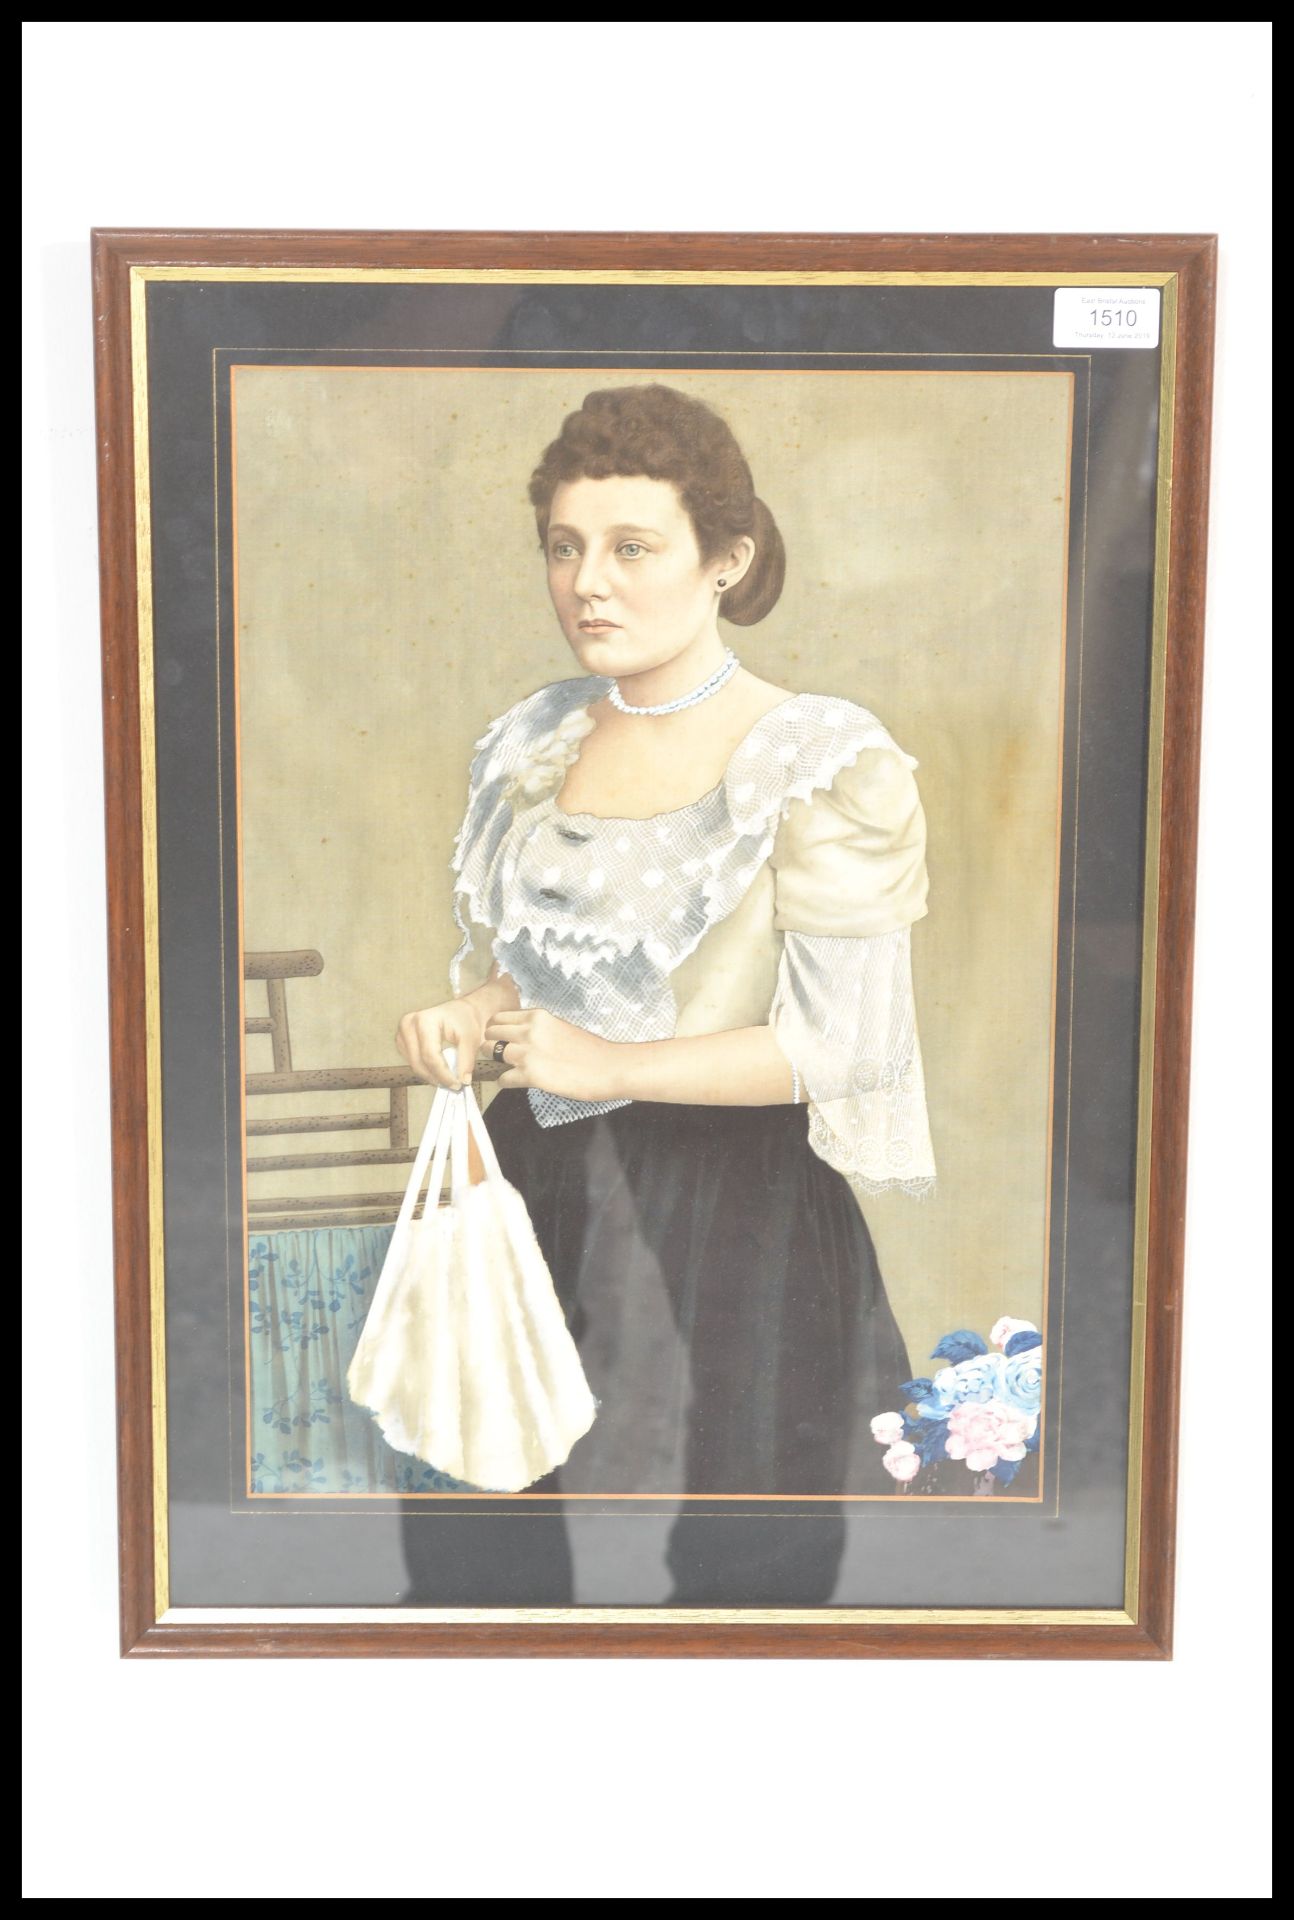 A late 19th century Victorian/ early 20th Century Edwardian gouache portrait of a women on silk. The